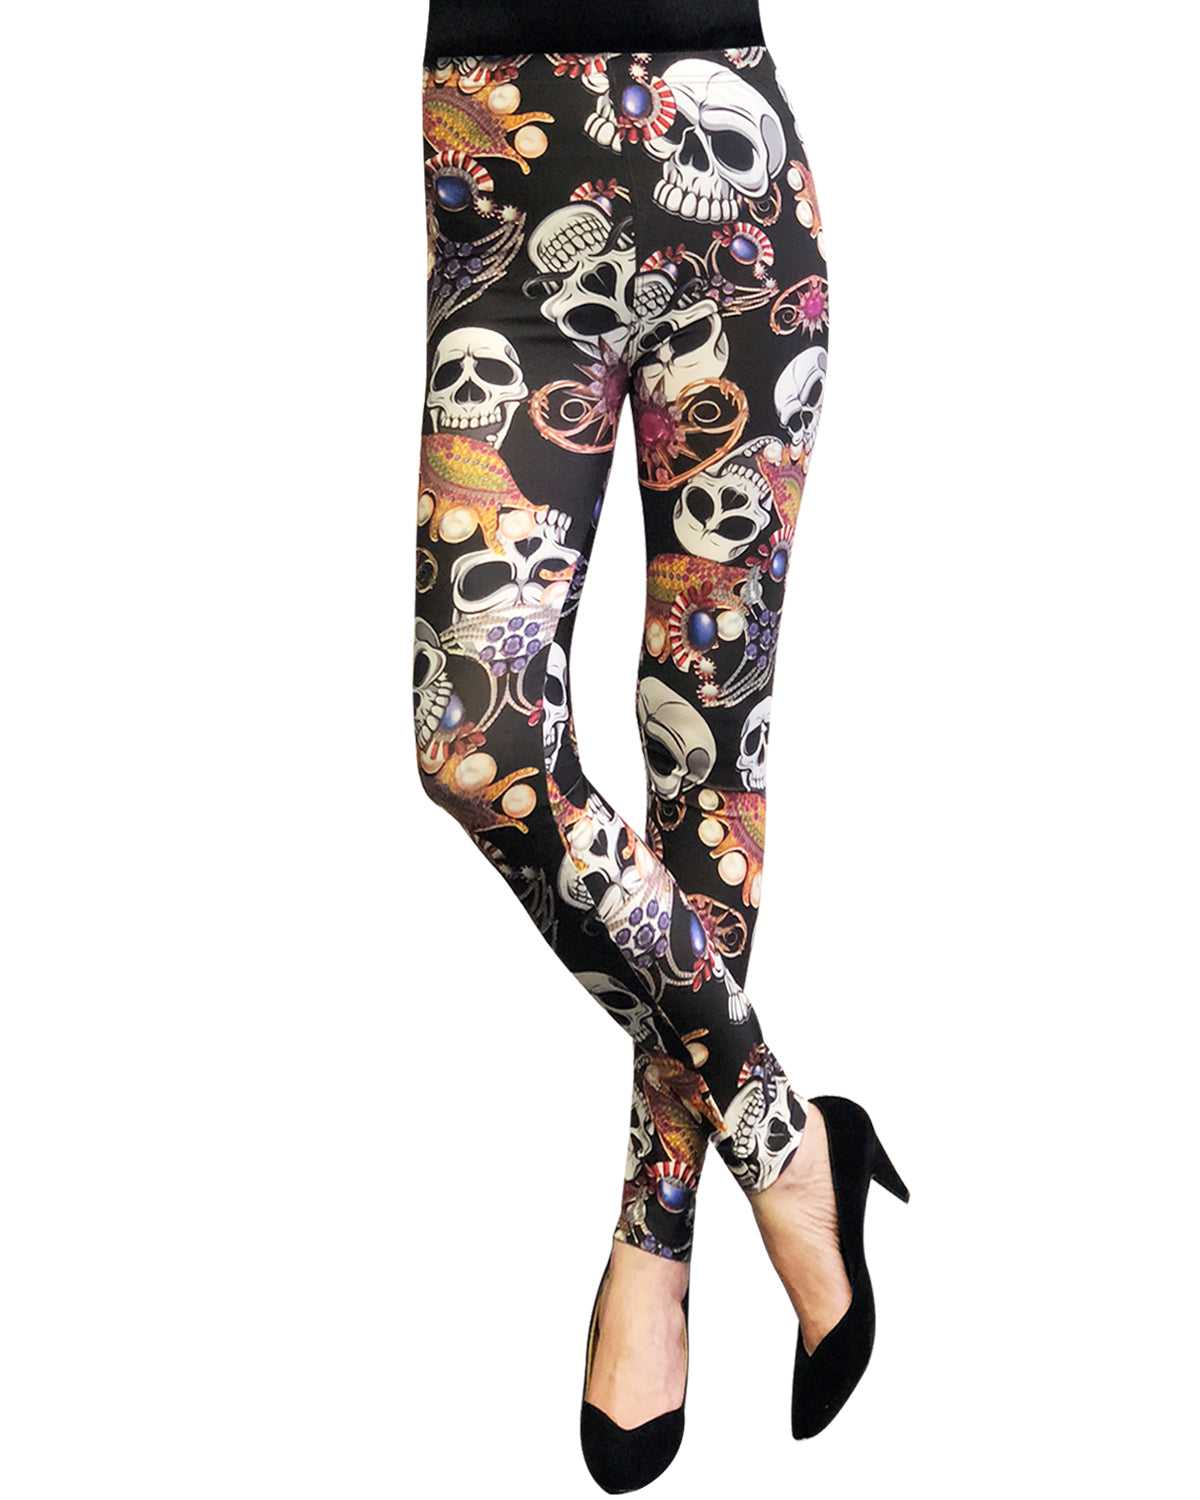 WrapablesÂ® Womenâ€™s Ultra-Soft and Stretchy Printed Leggings for Activewear and Workout